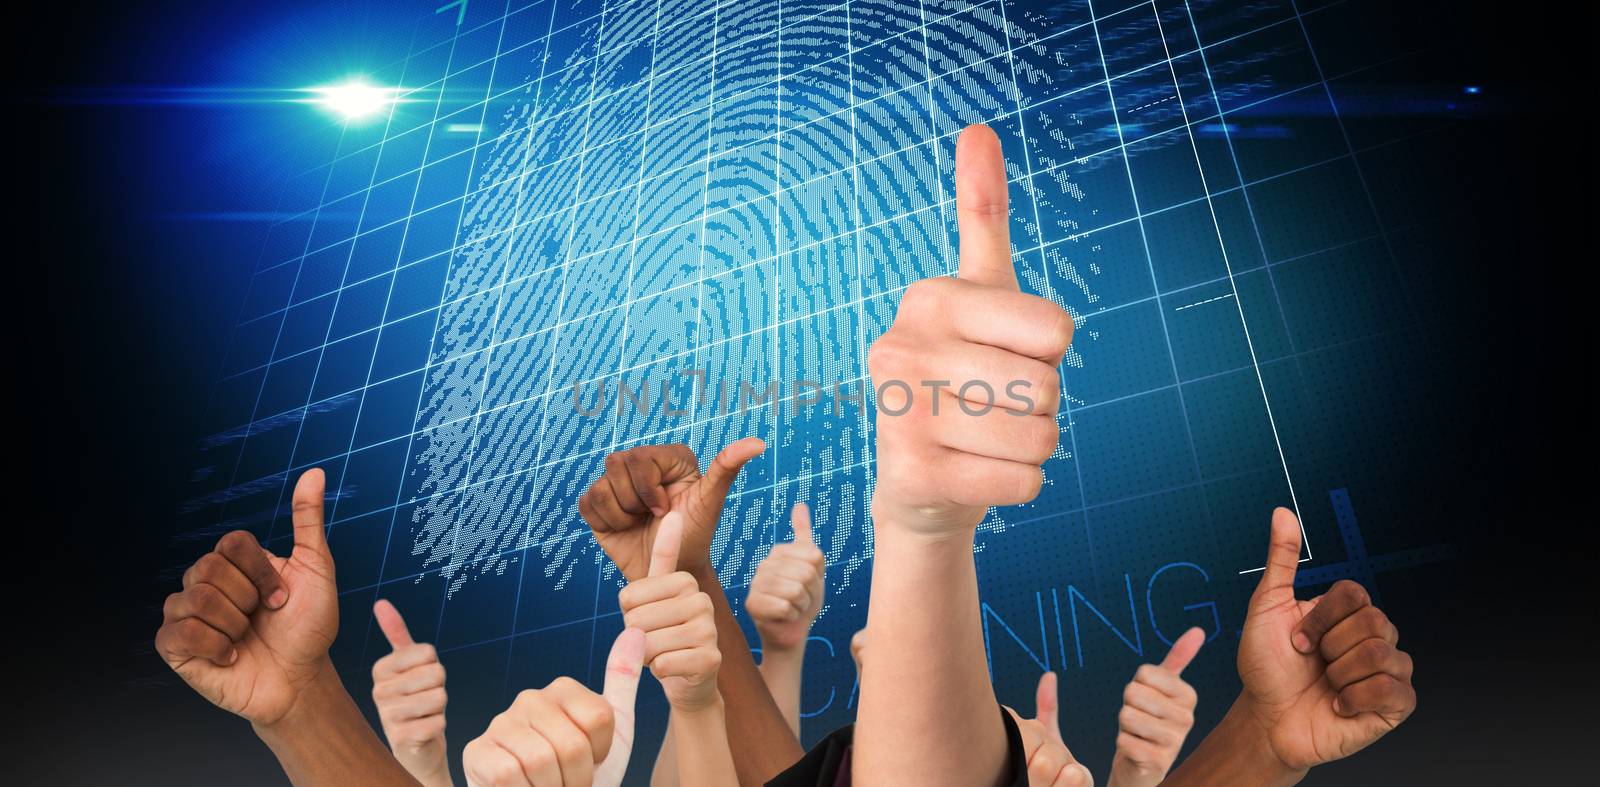 Hands showing thumbs up against digital security finger print scan